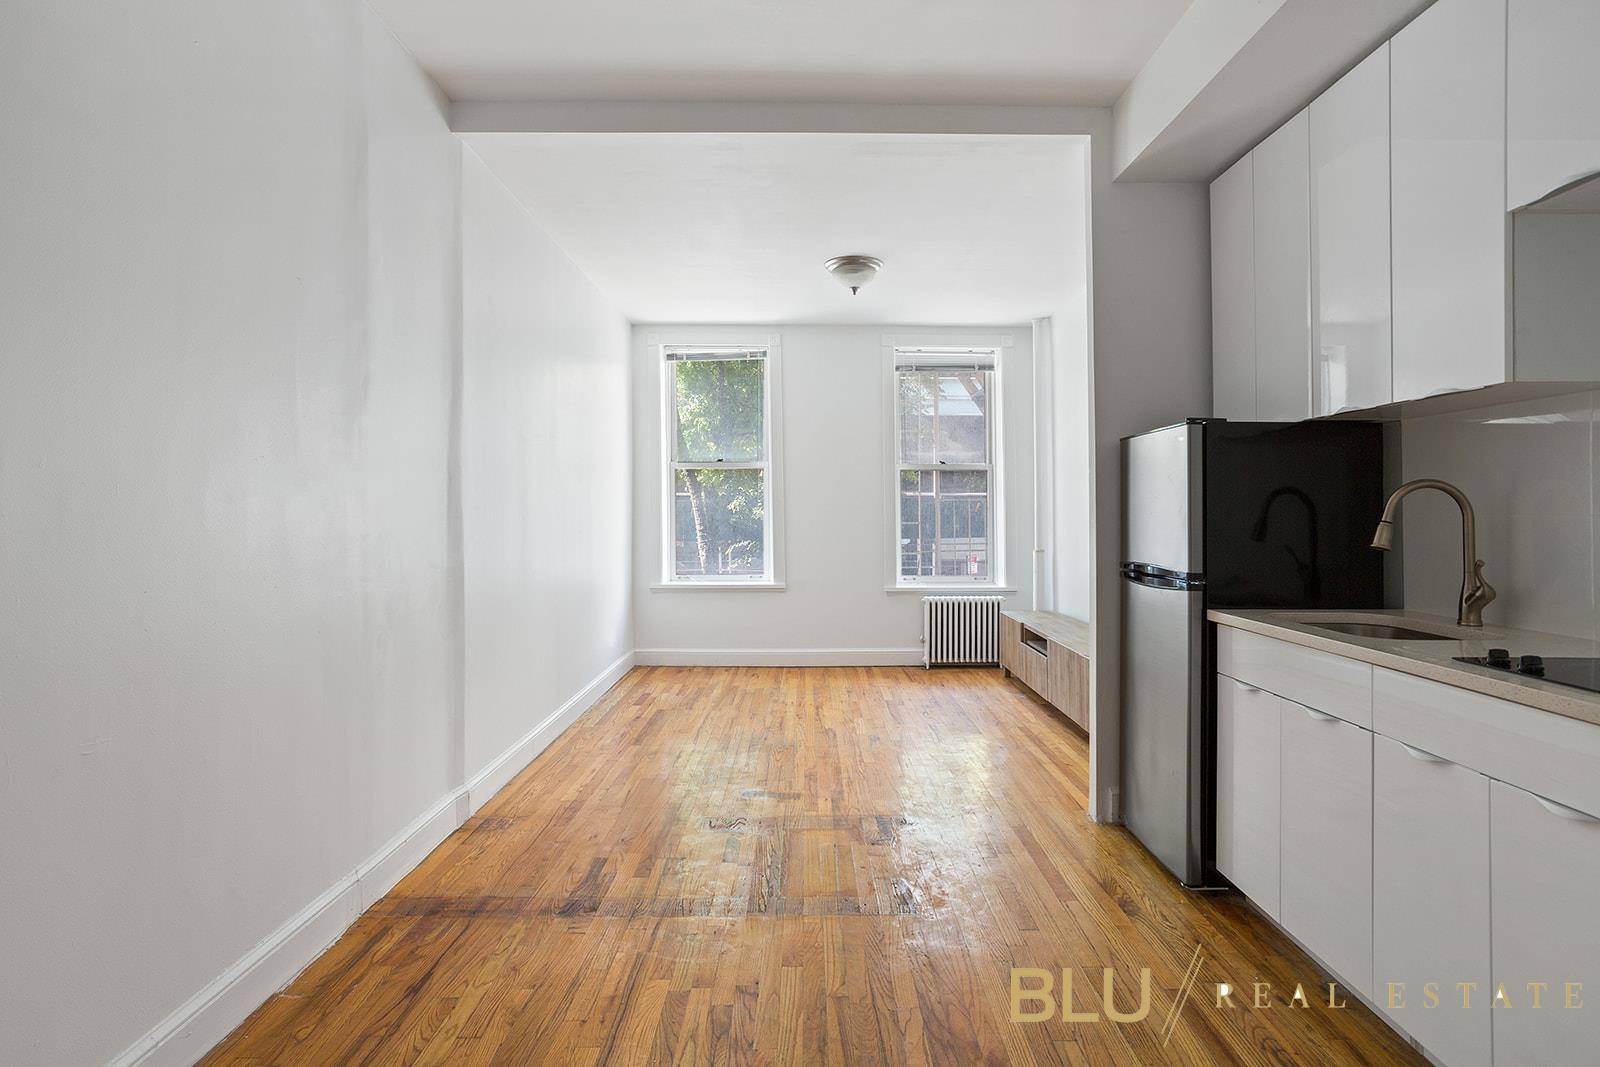 NO BROKER FEE. Charming 1 bedroom railroad apartment in the heart of sought after Soho neighborhood !